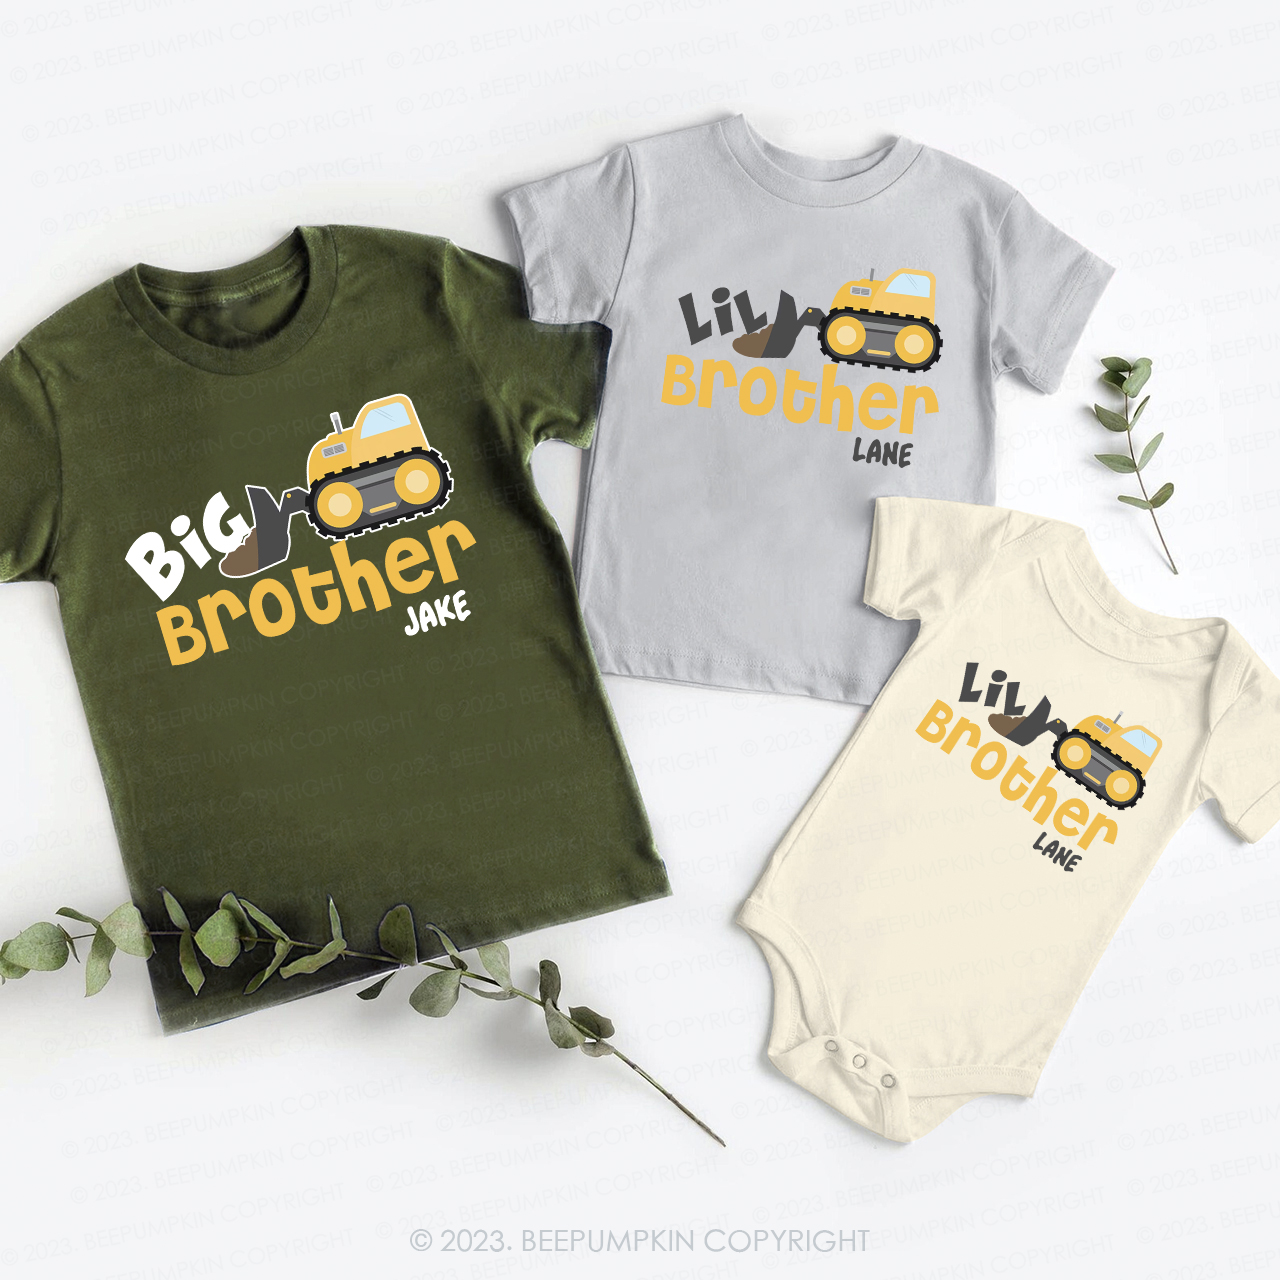 Construction Truck Matching Big Brother Little Brother Shirts